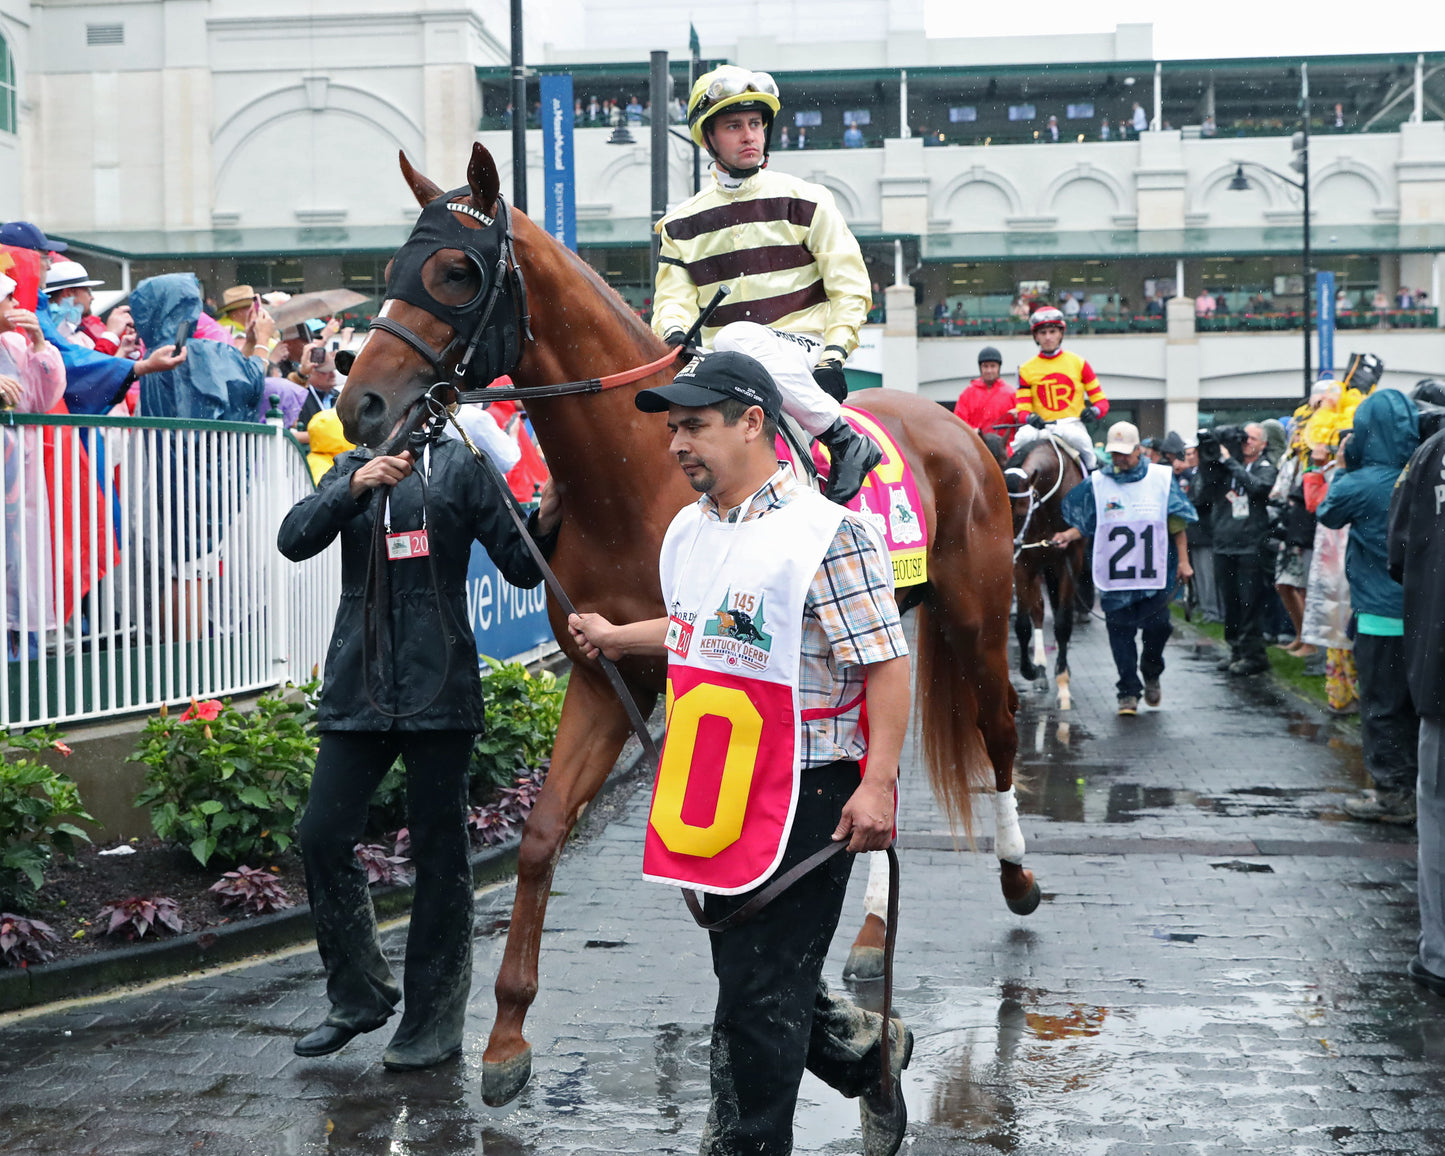 COUNTRY HOUSE - The Kentucky Derby - 145th Running - 05-04-19 - R12 - CD - Paddock 04